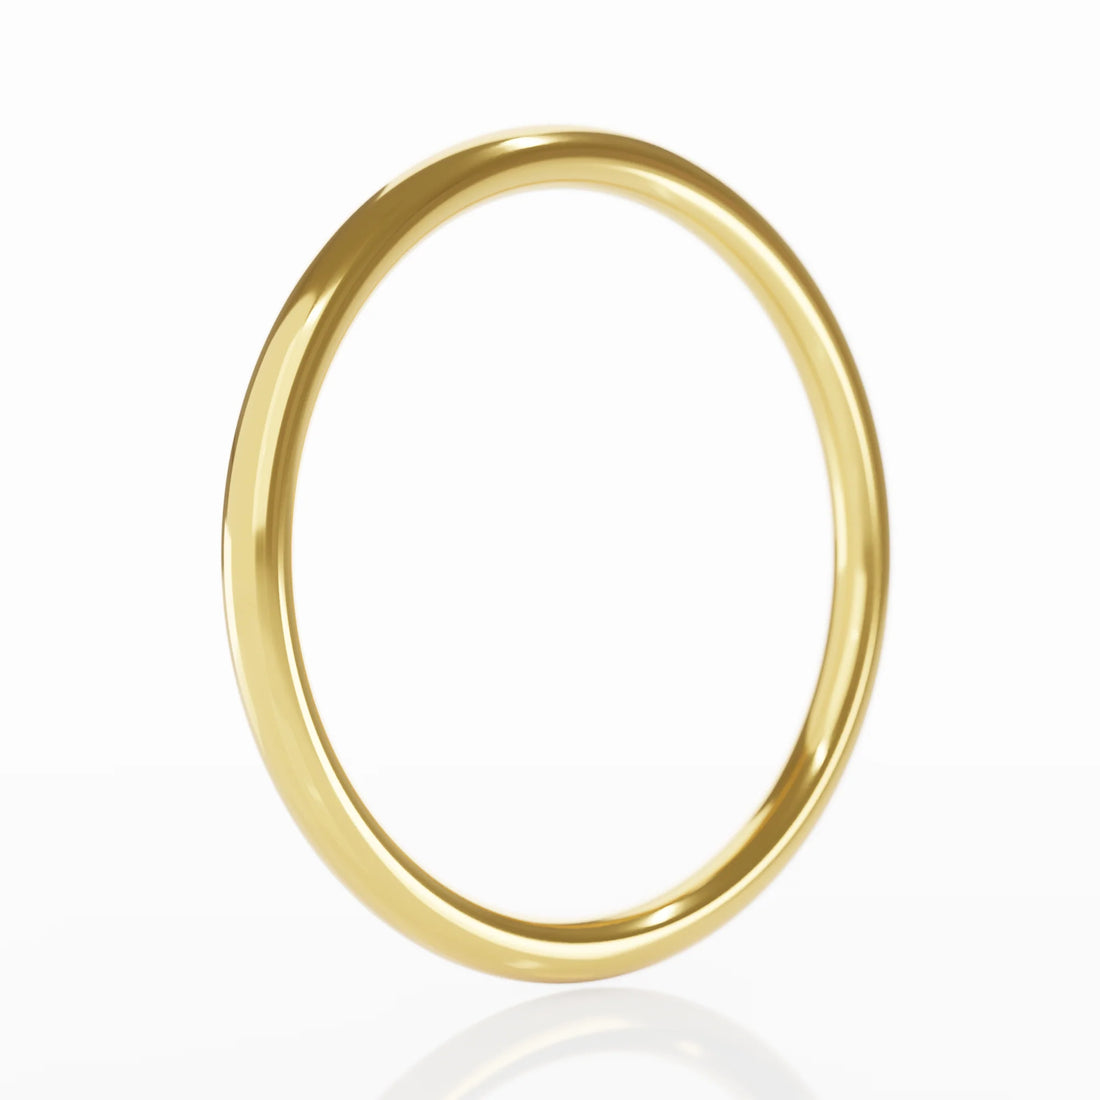 Choosing the Perfect Golden Rings for Your Special Occasion